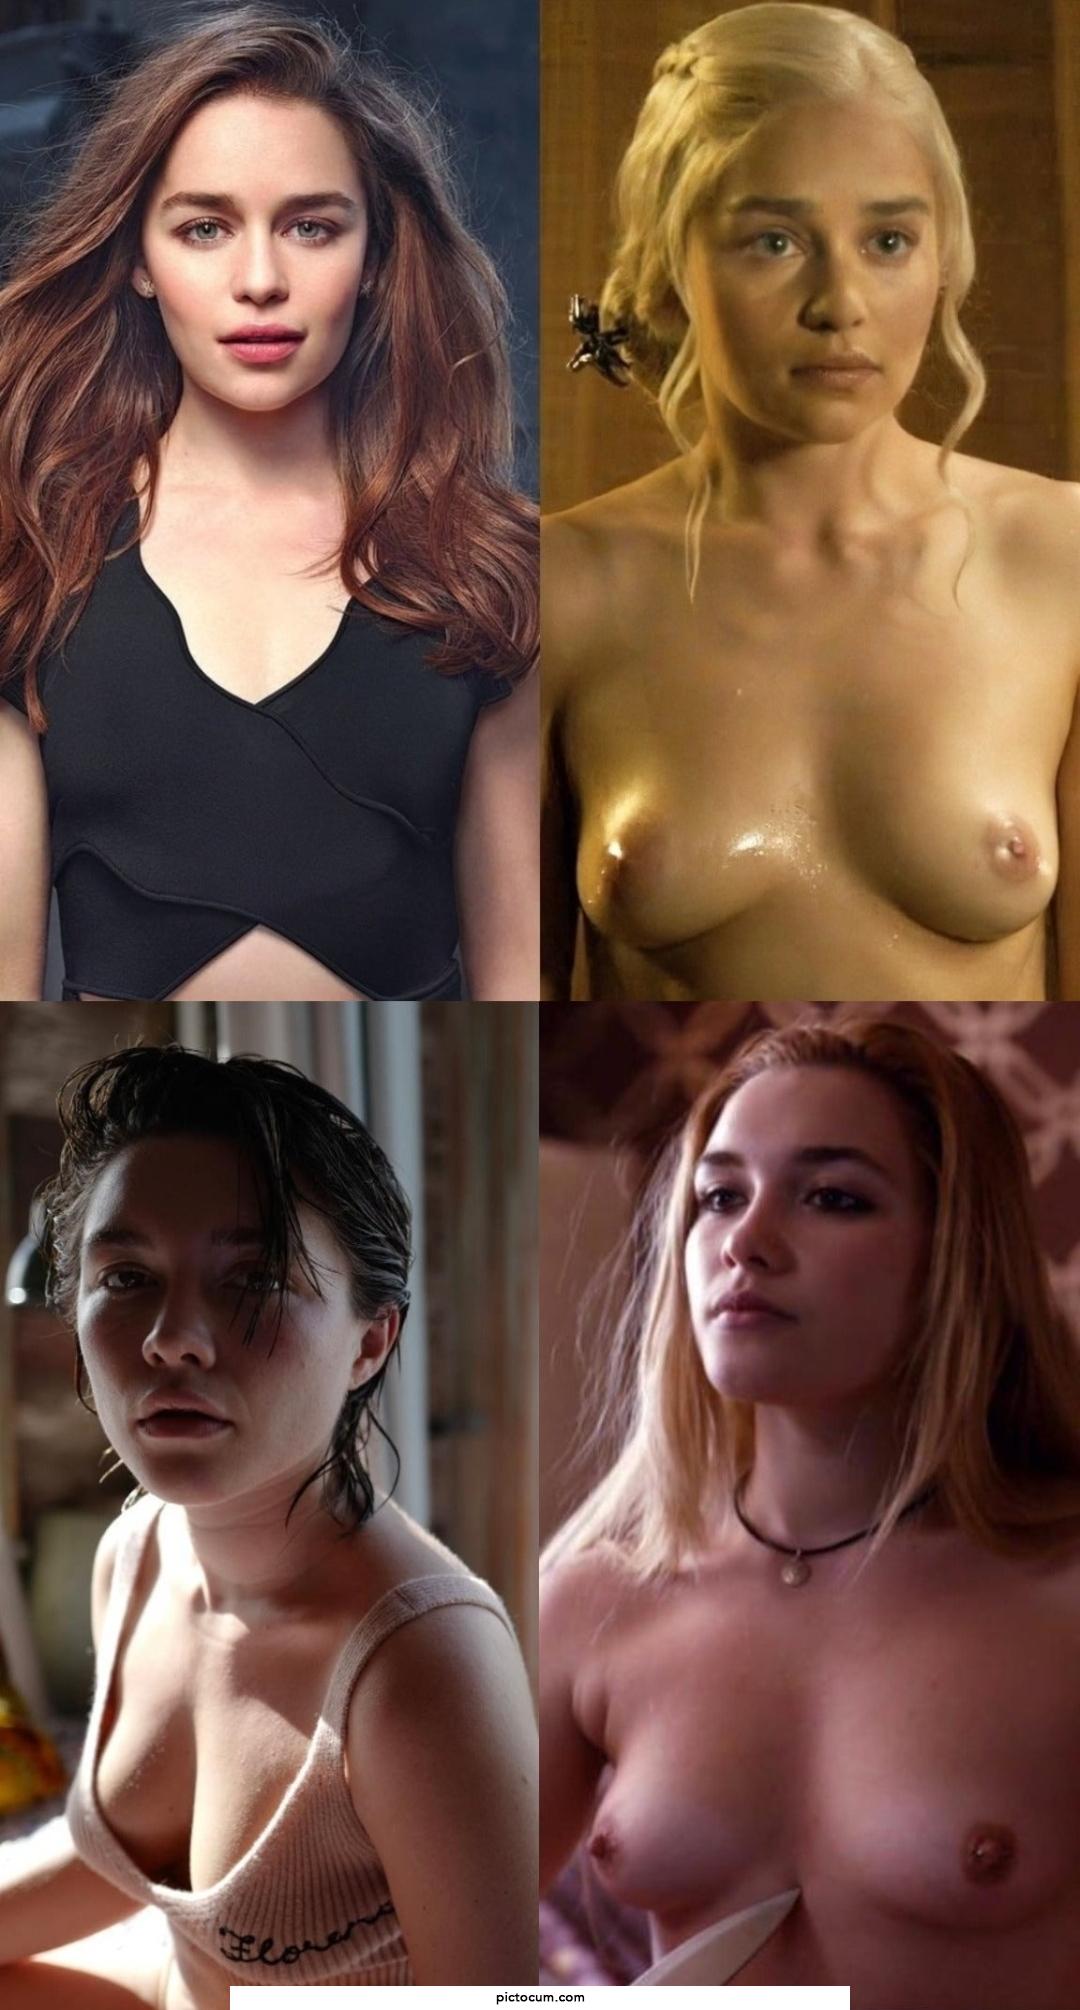 Who'd get your jizz out more: Emilia Clarke or Florence Pugh?